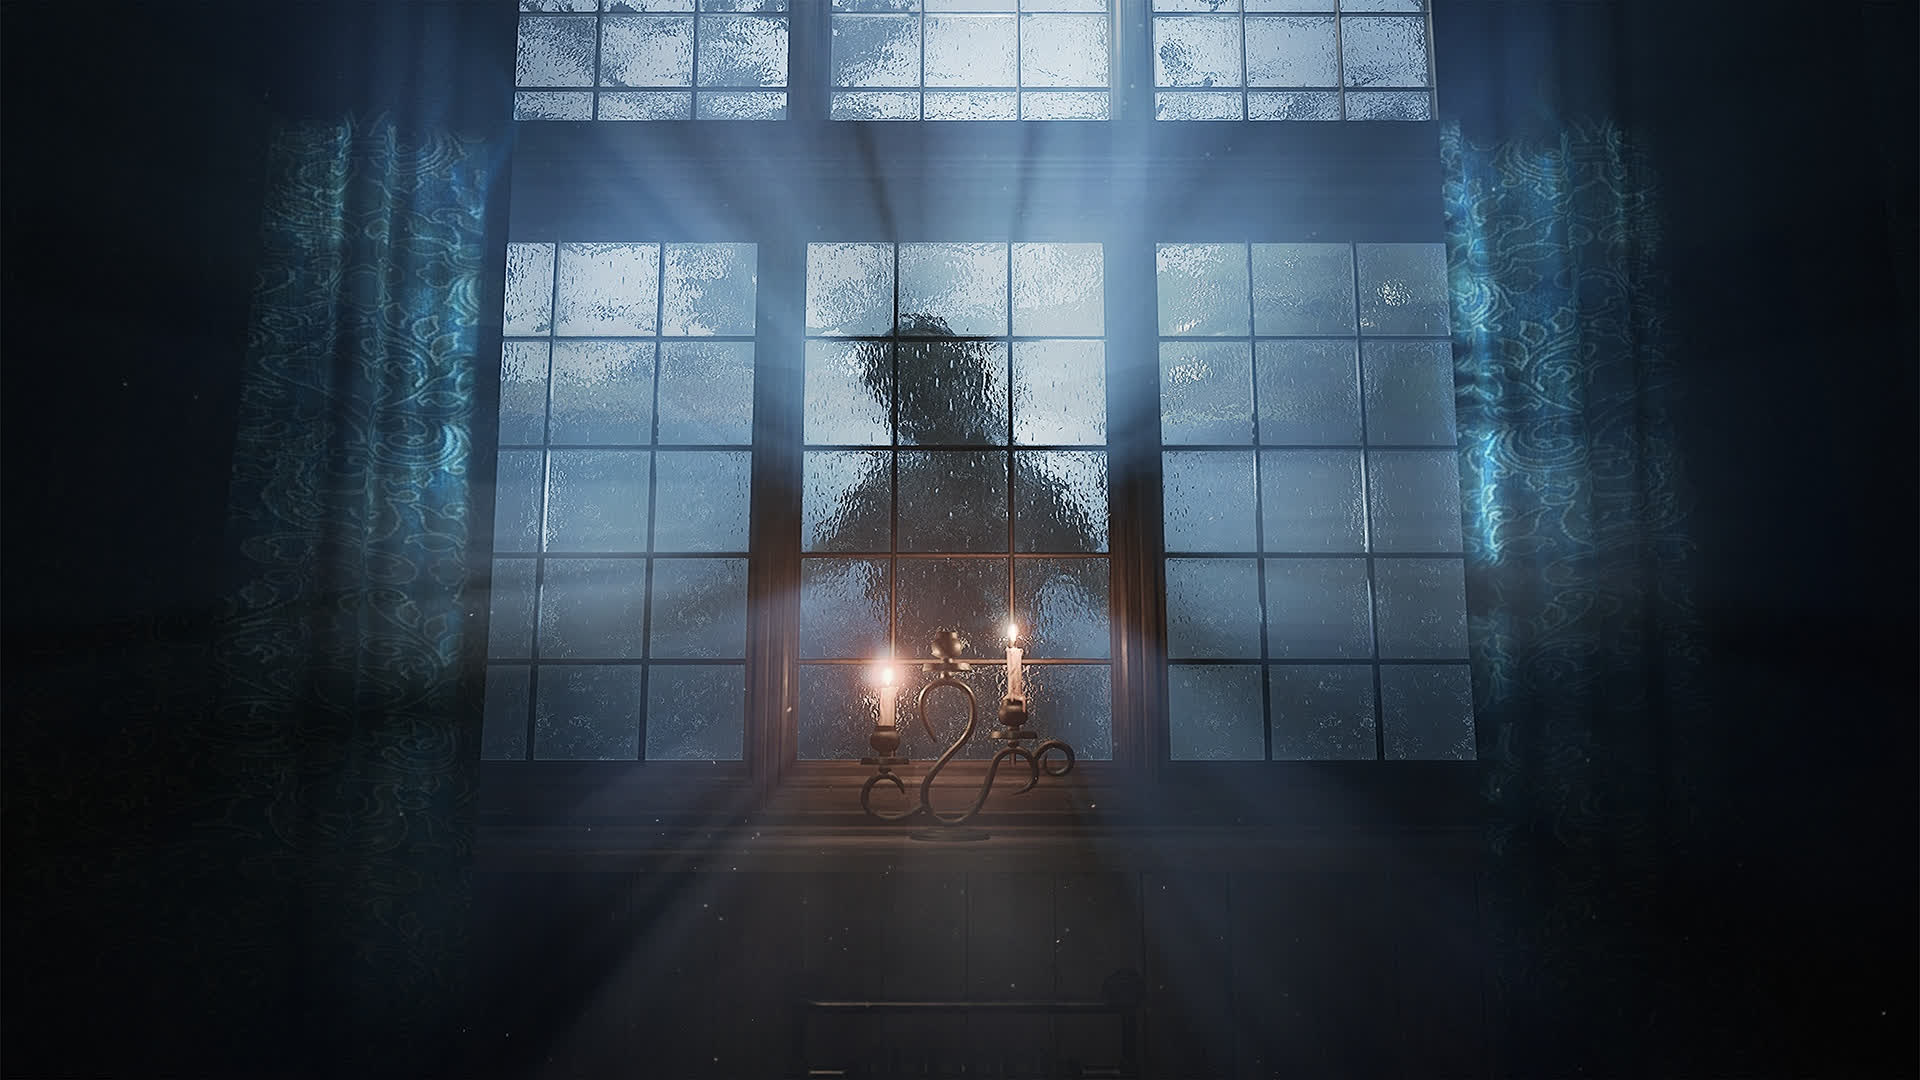 Wie du alle Poster (Filmposter) in Layers of Fear 2023 findest